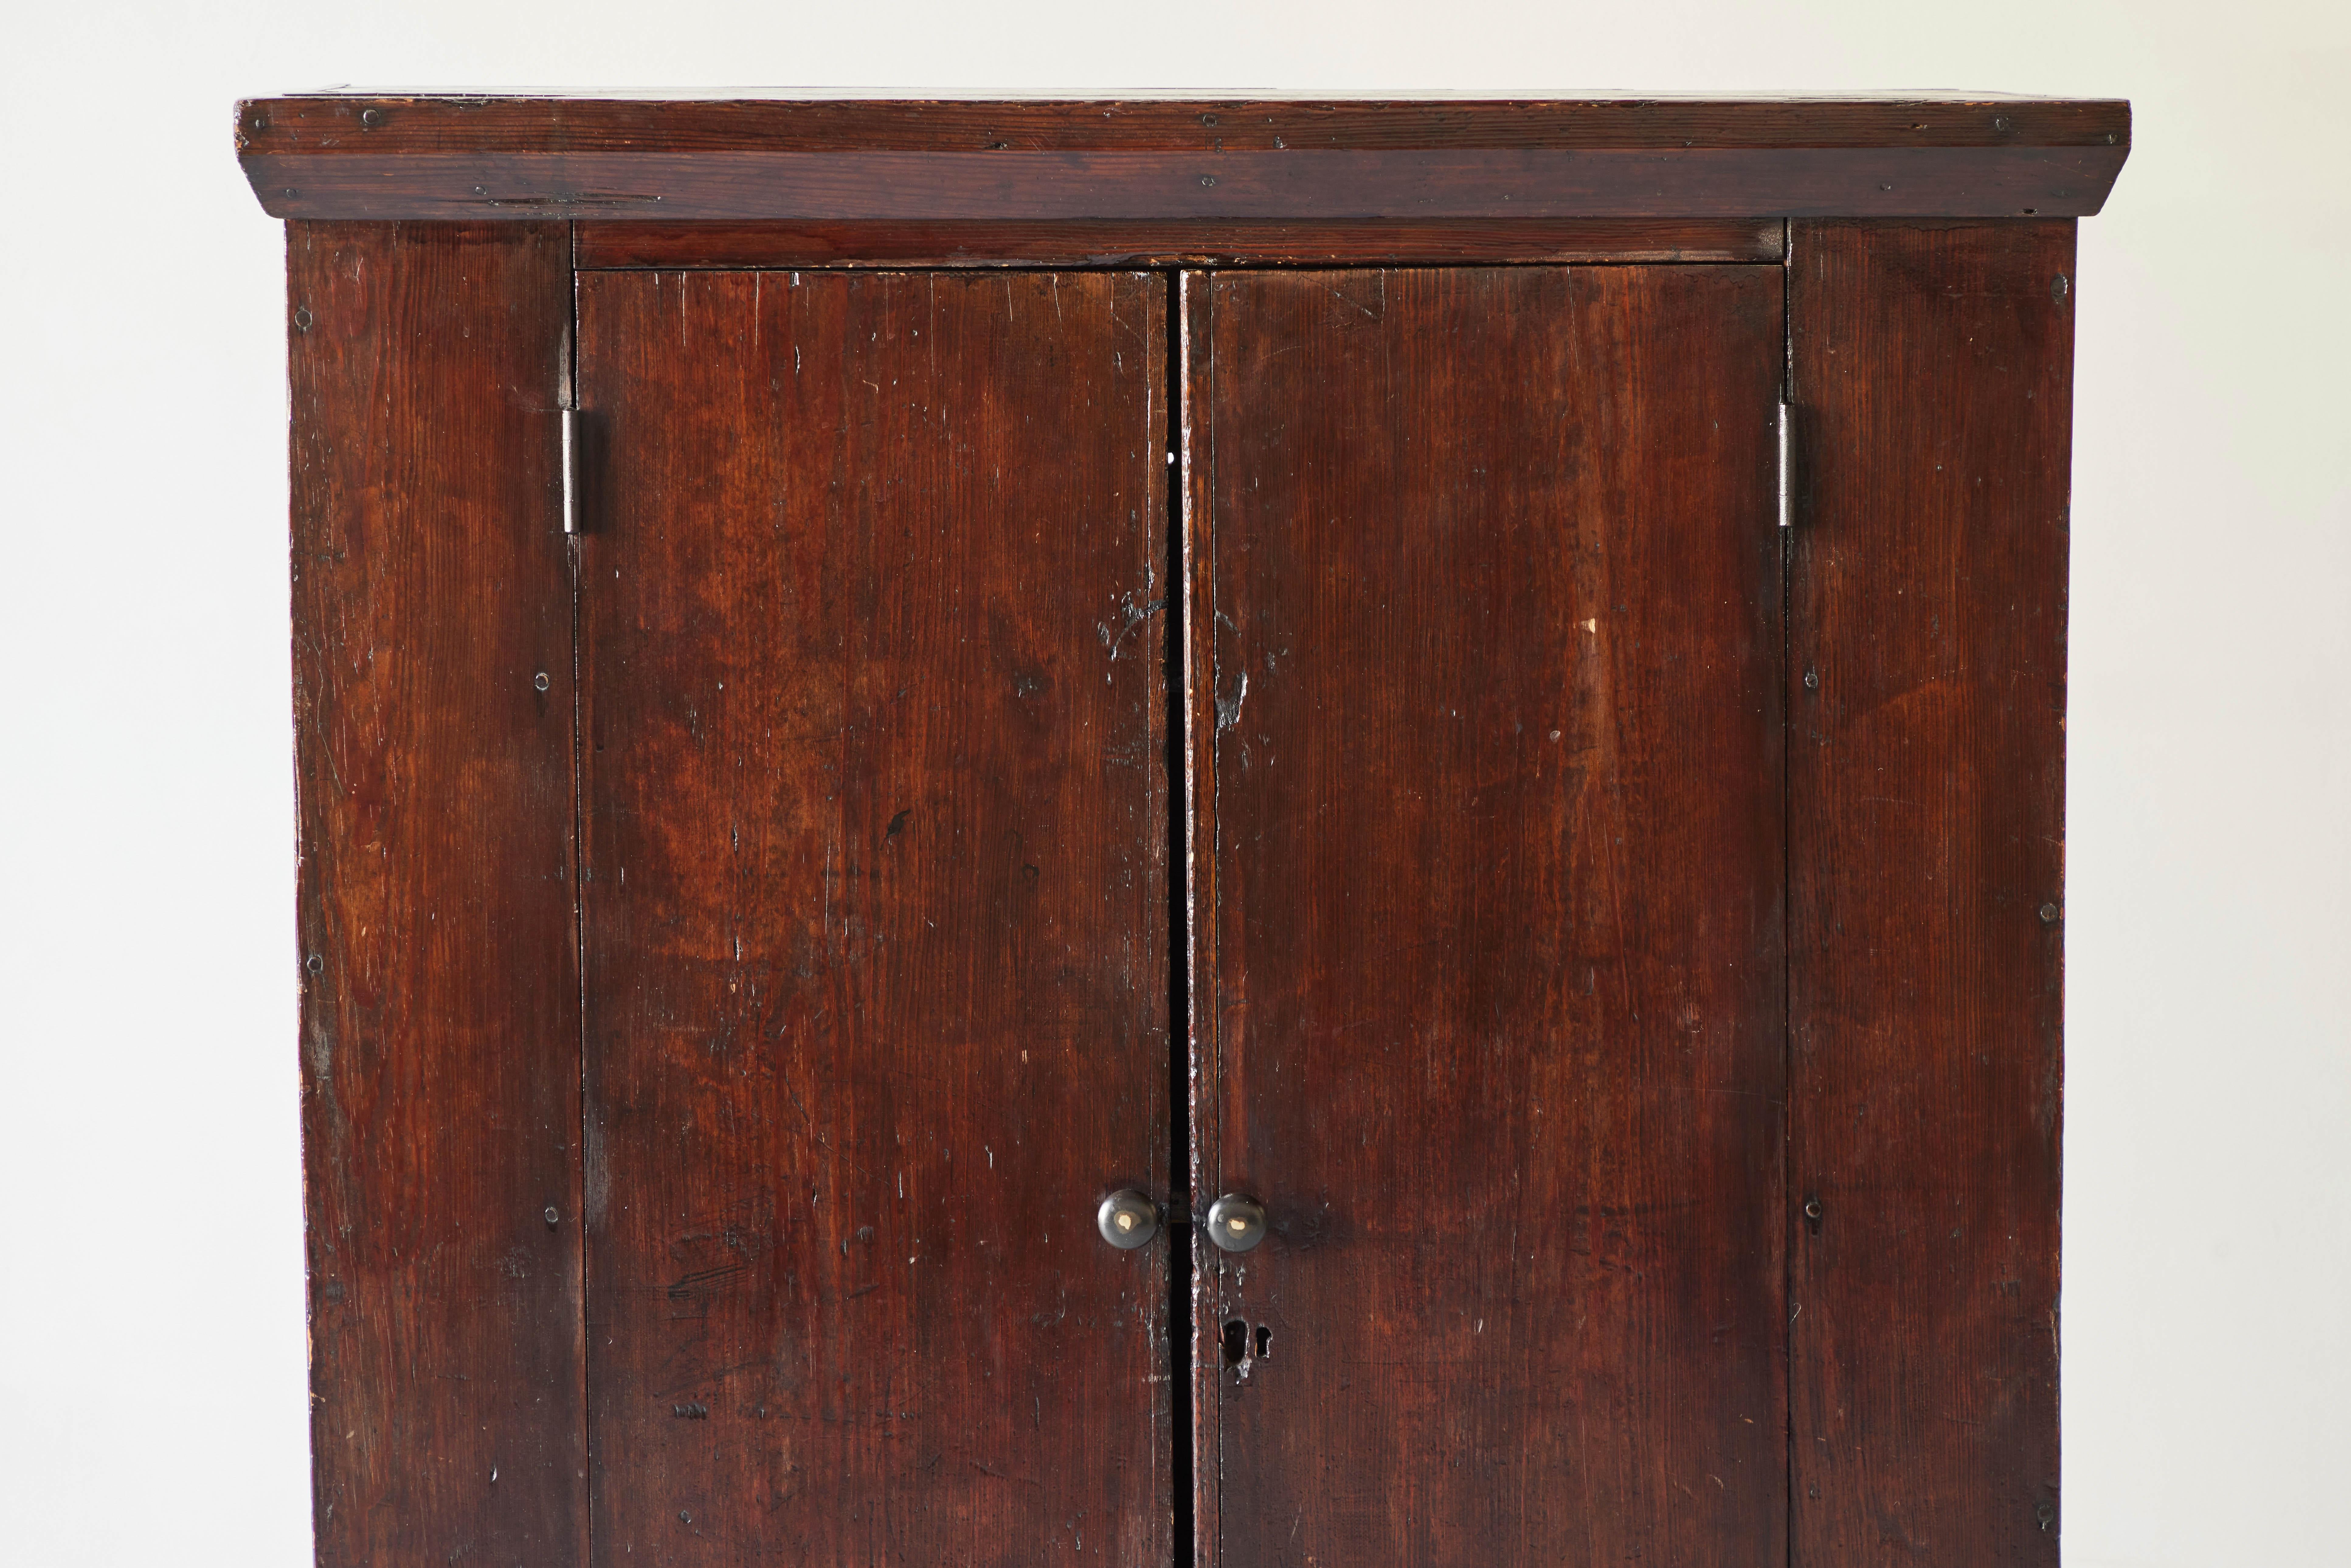 This Early American cabinet is a Classic example of Early American furniture with legs and feet that are simply downward extensions of the simplistic rectangular style. This piece can be classified as in the style of Shaker furniture with its